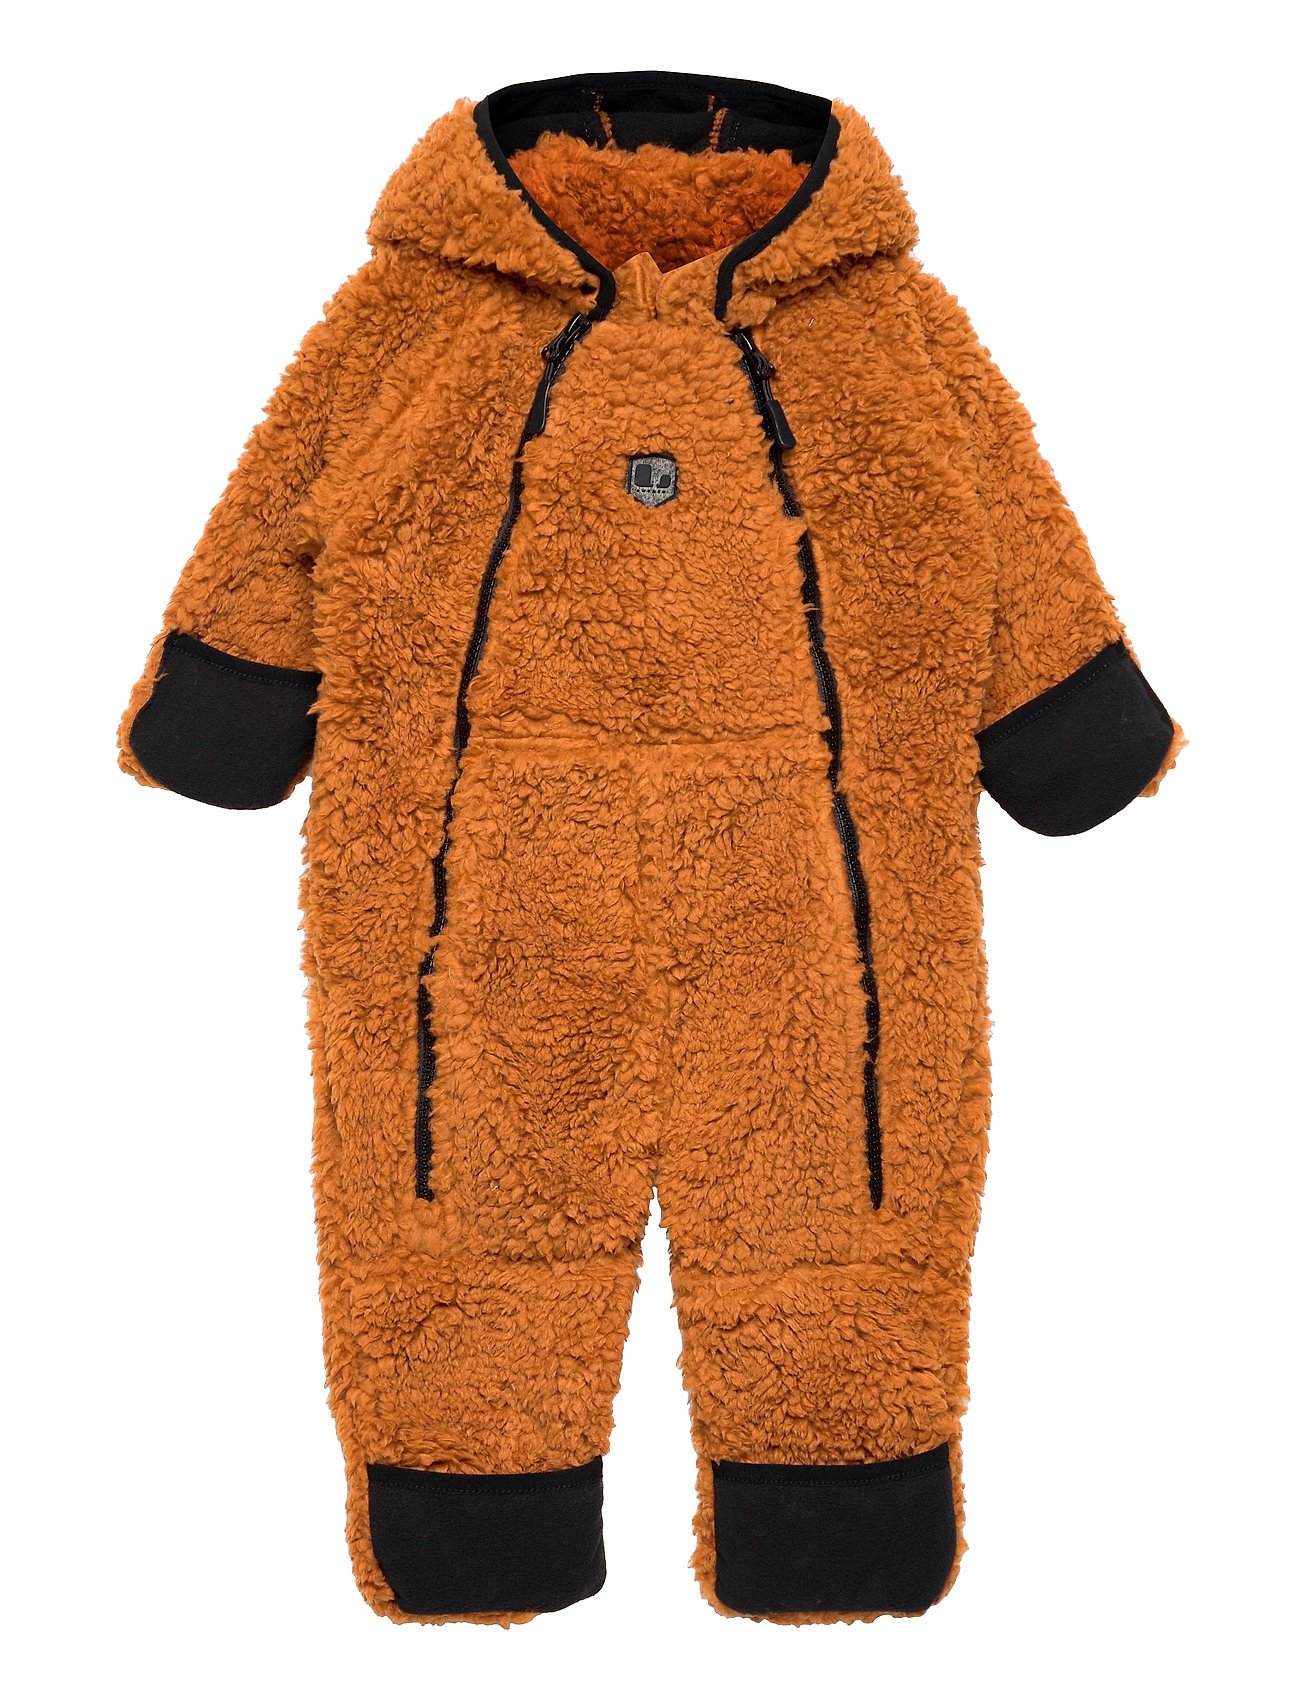 Muddus Pile Baby Overall Windfleece Outerwear Fleece Outerwear Fleece Suits Beige Lindberg Sweden